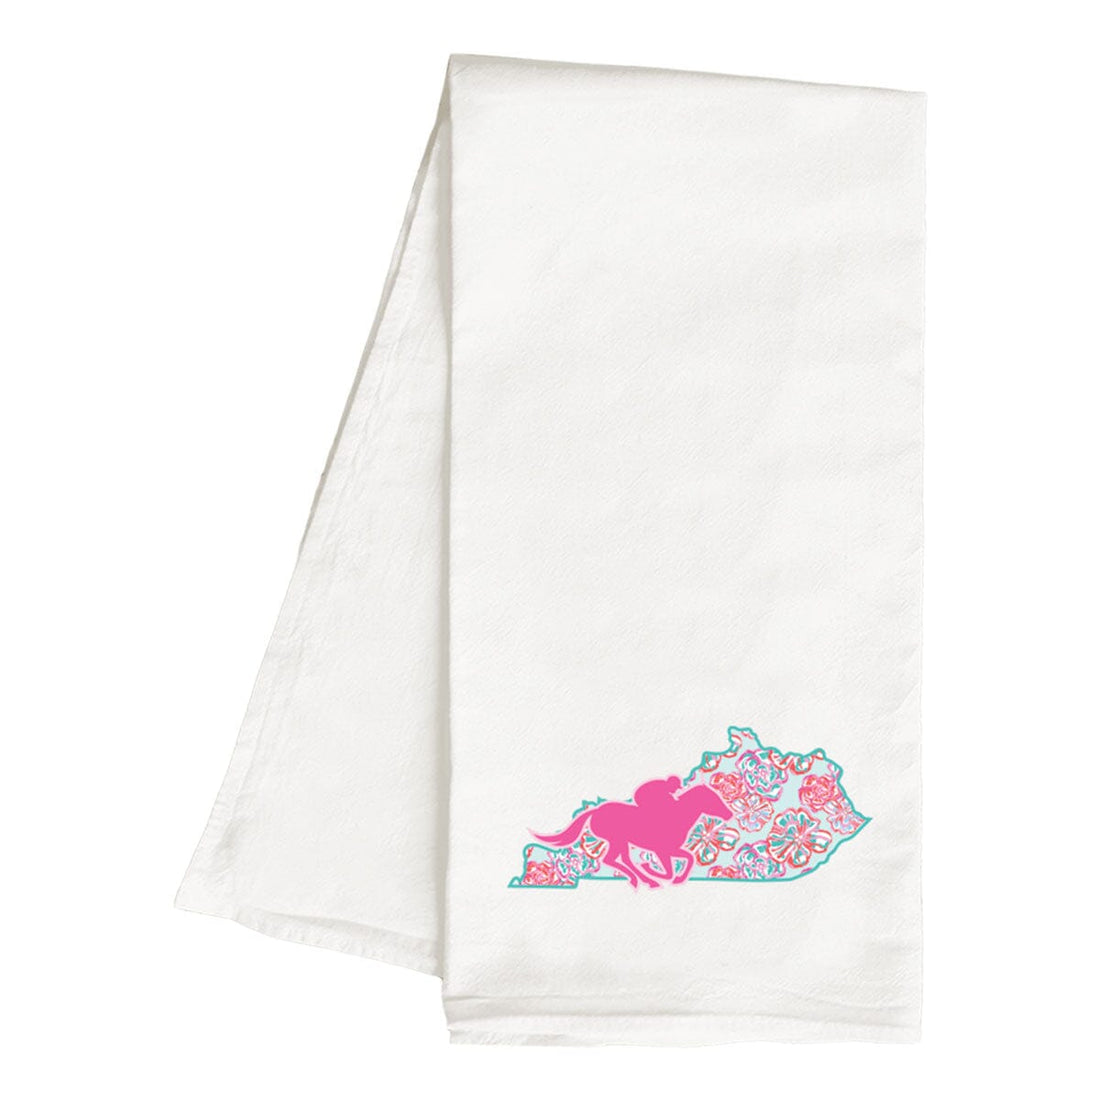 Printed Run For The Roses Hand Towel